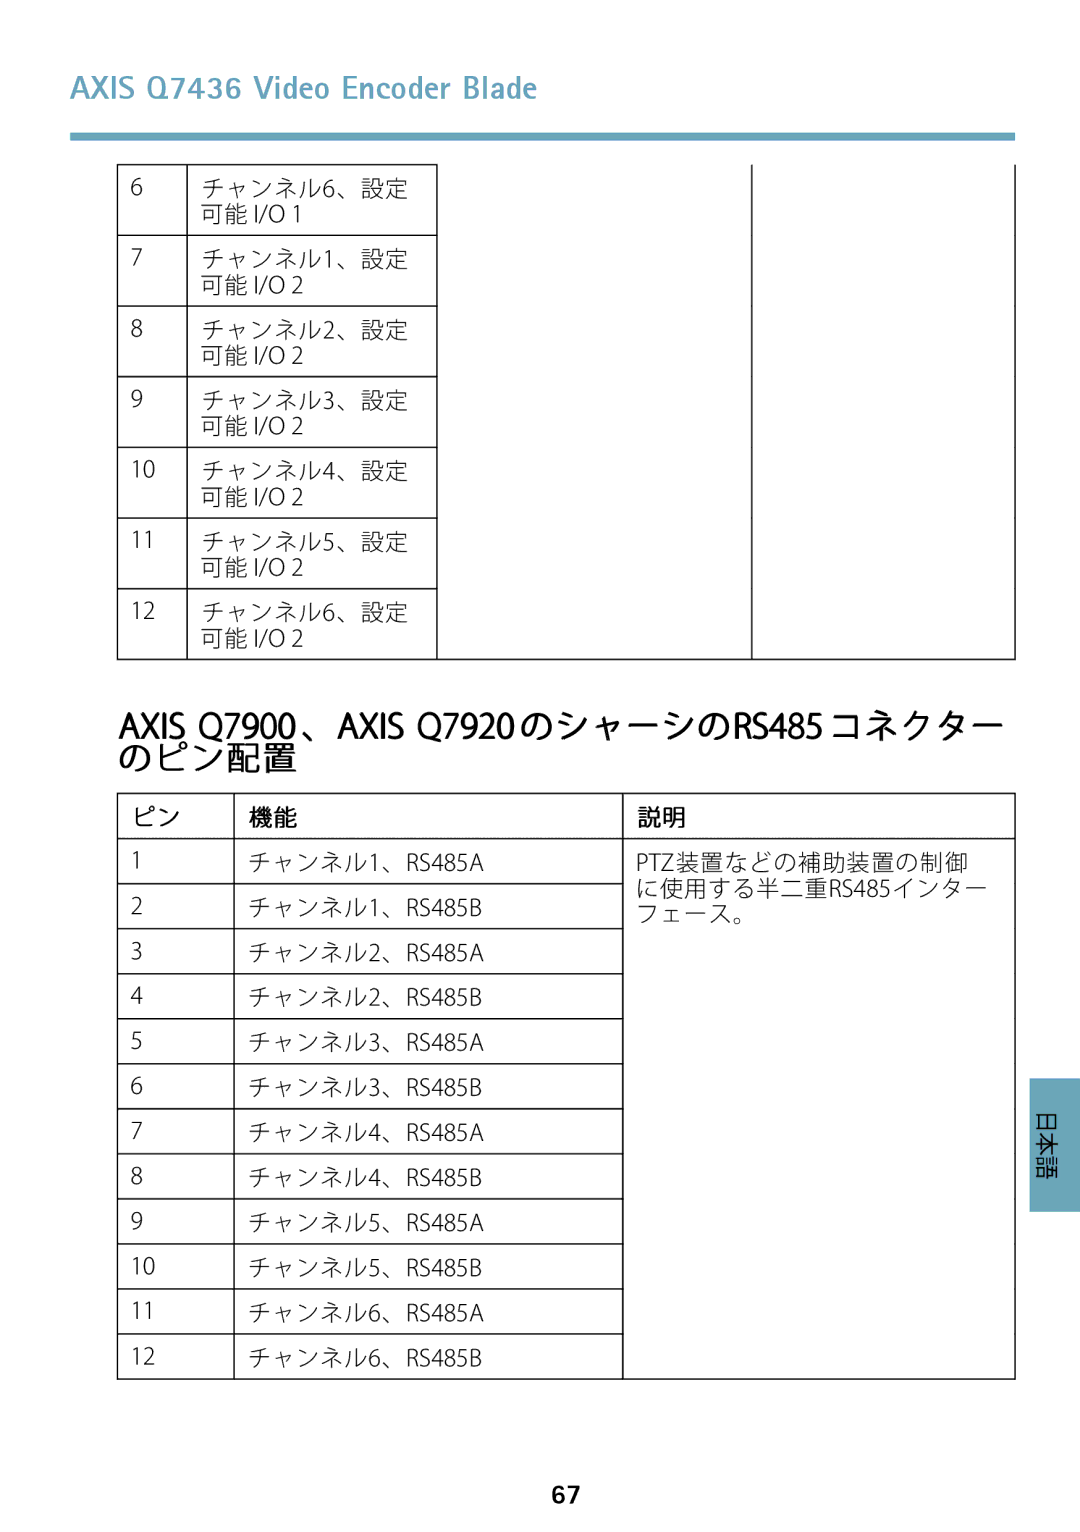 Axis Communications AXIS Q7436 manual Axis Q7900 、AXIS Q7920 のシャーシのRS485 コネクター, のピン配置 